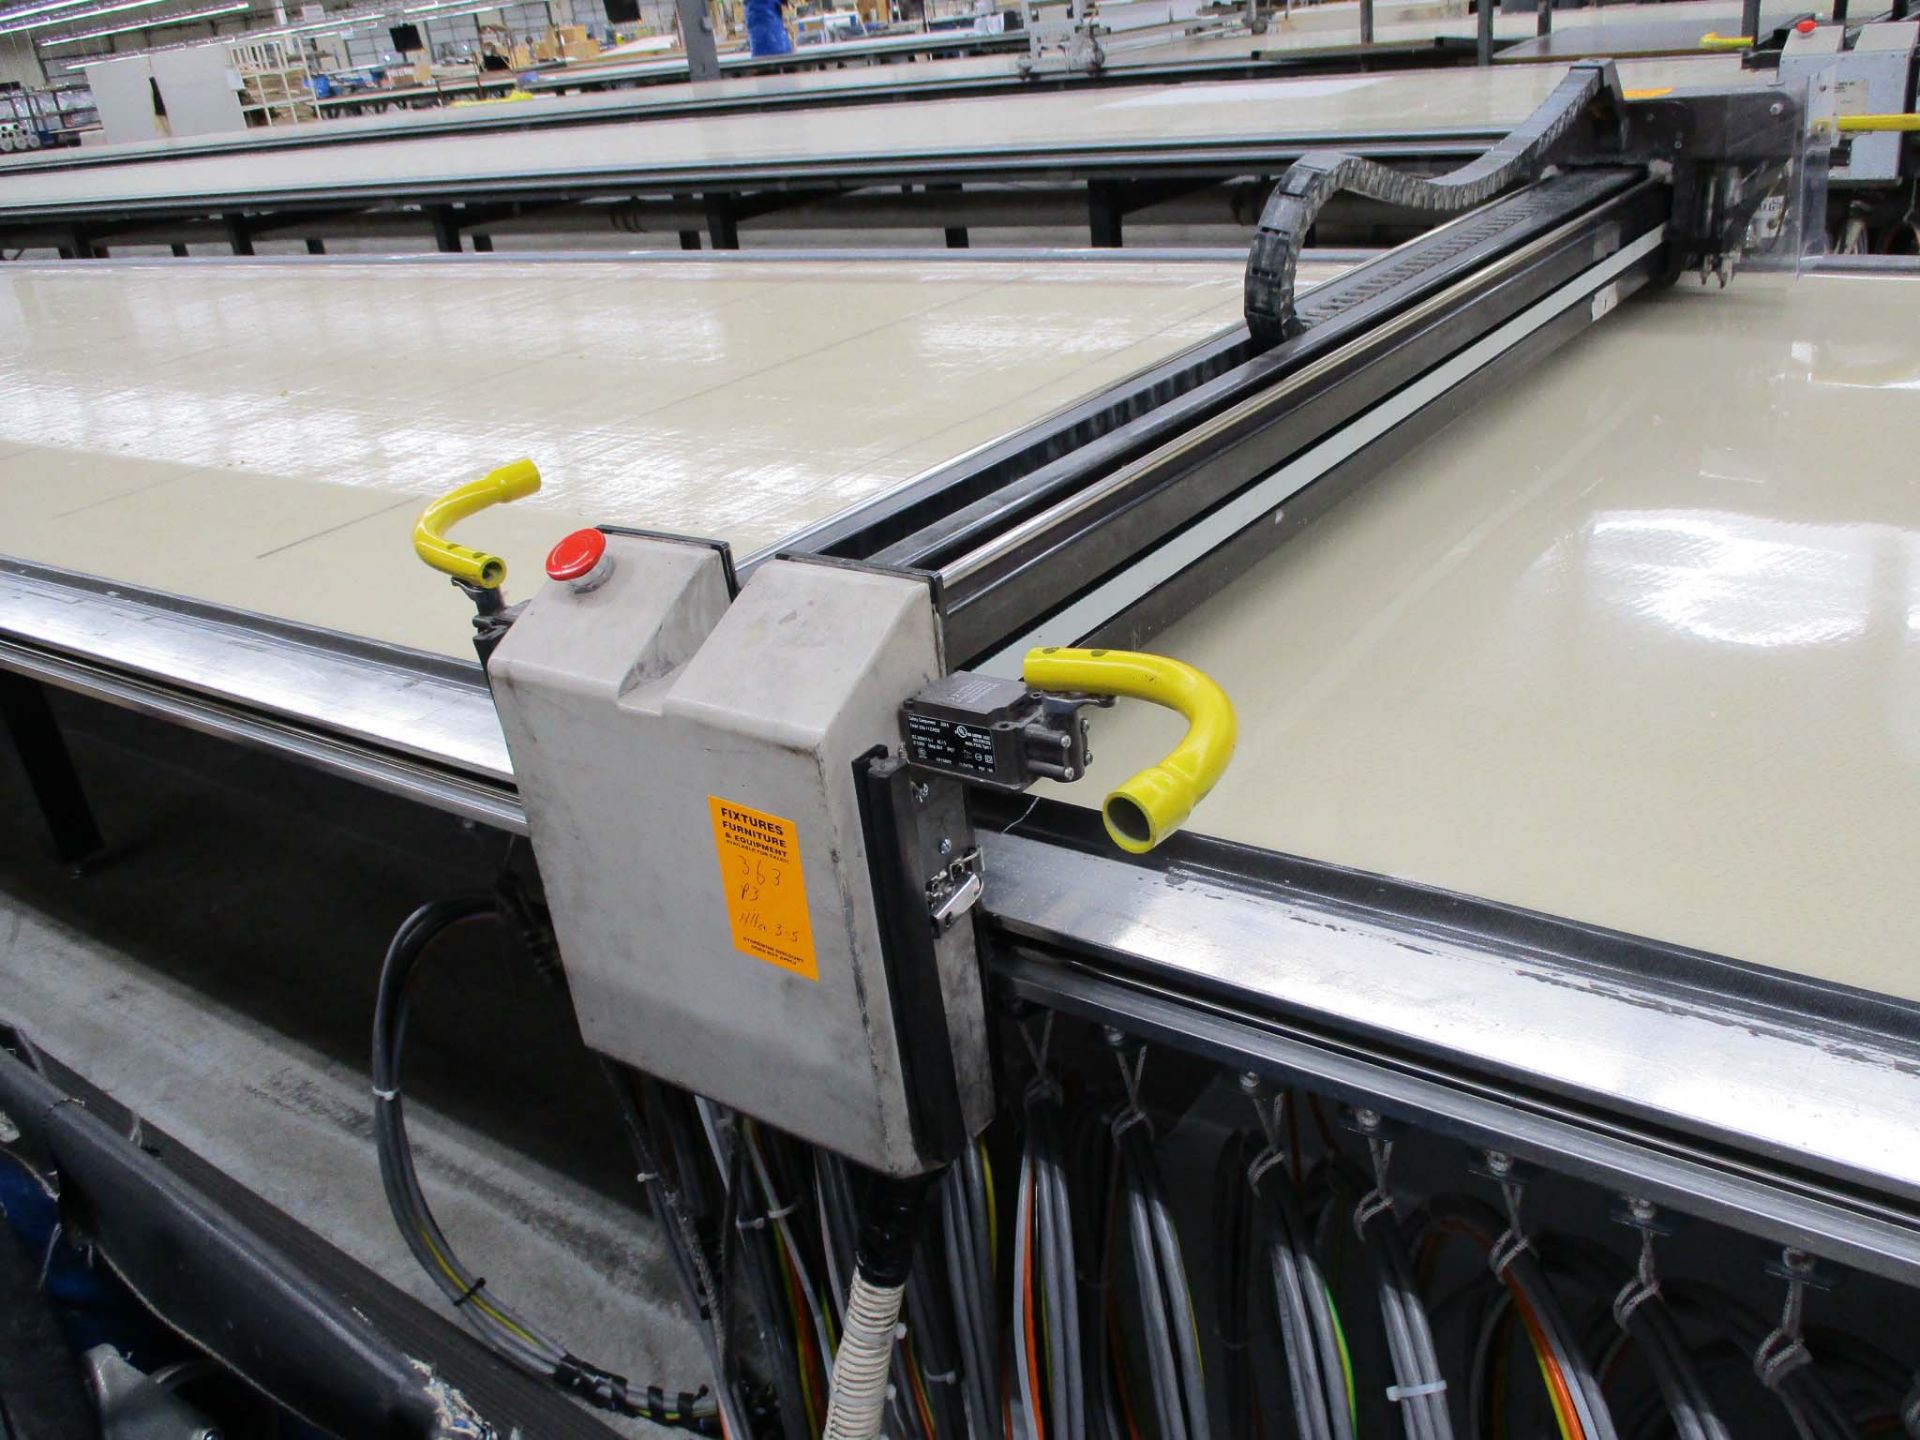 Custom made by Gerber, - Self Contained Vacuum Cutting Table - 109ft long x 6ft wide Vacuum Cutting